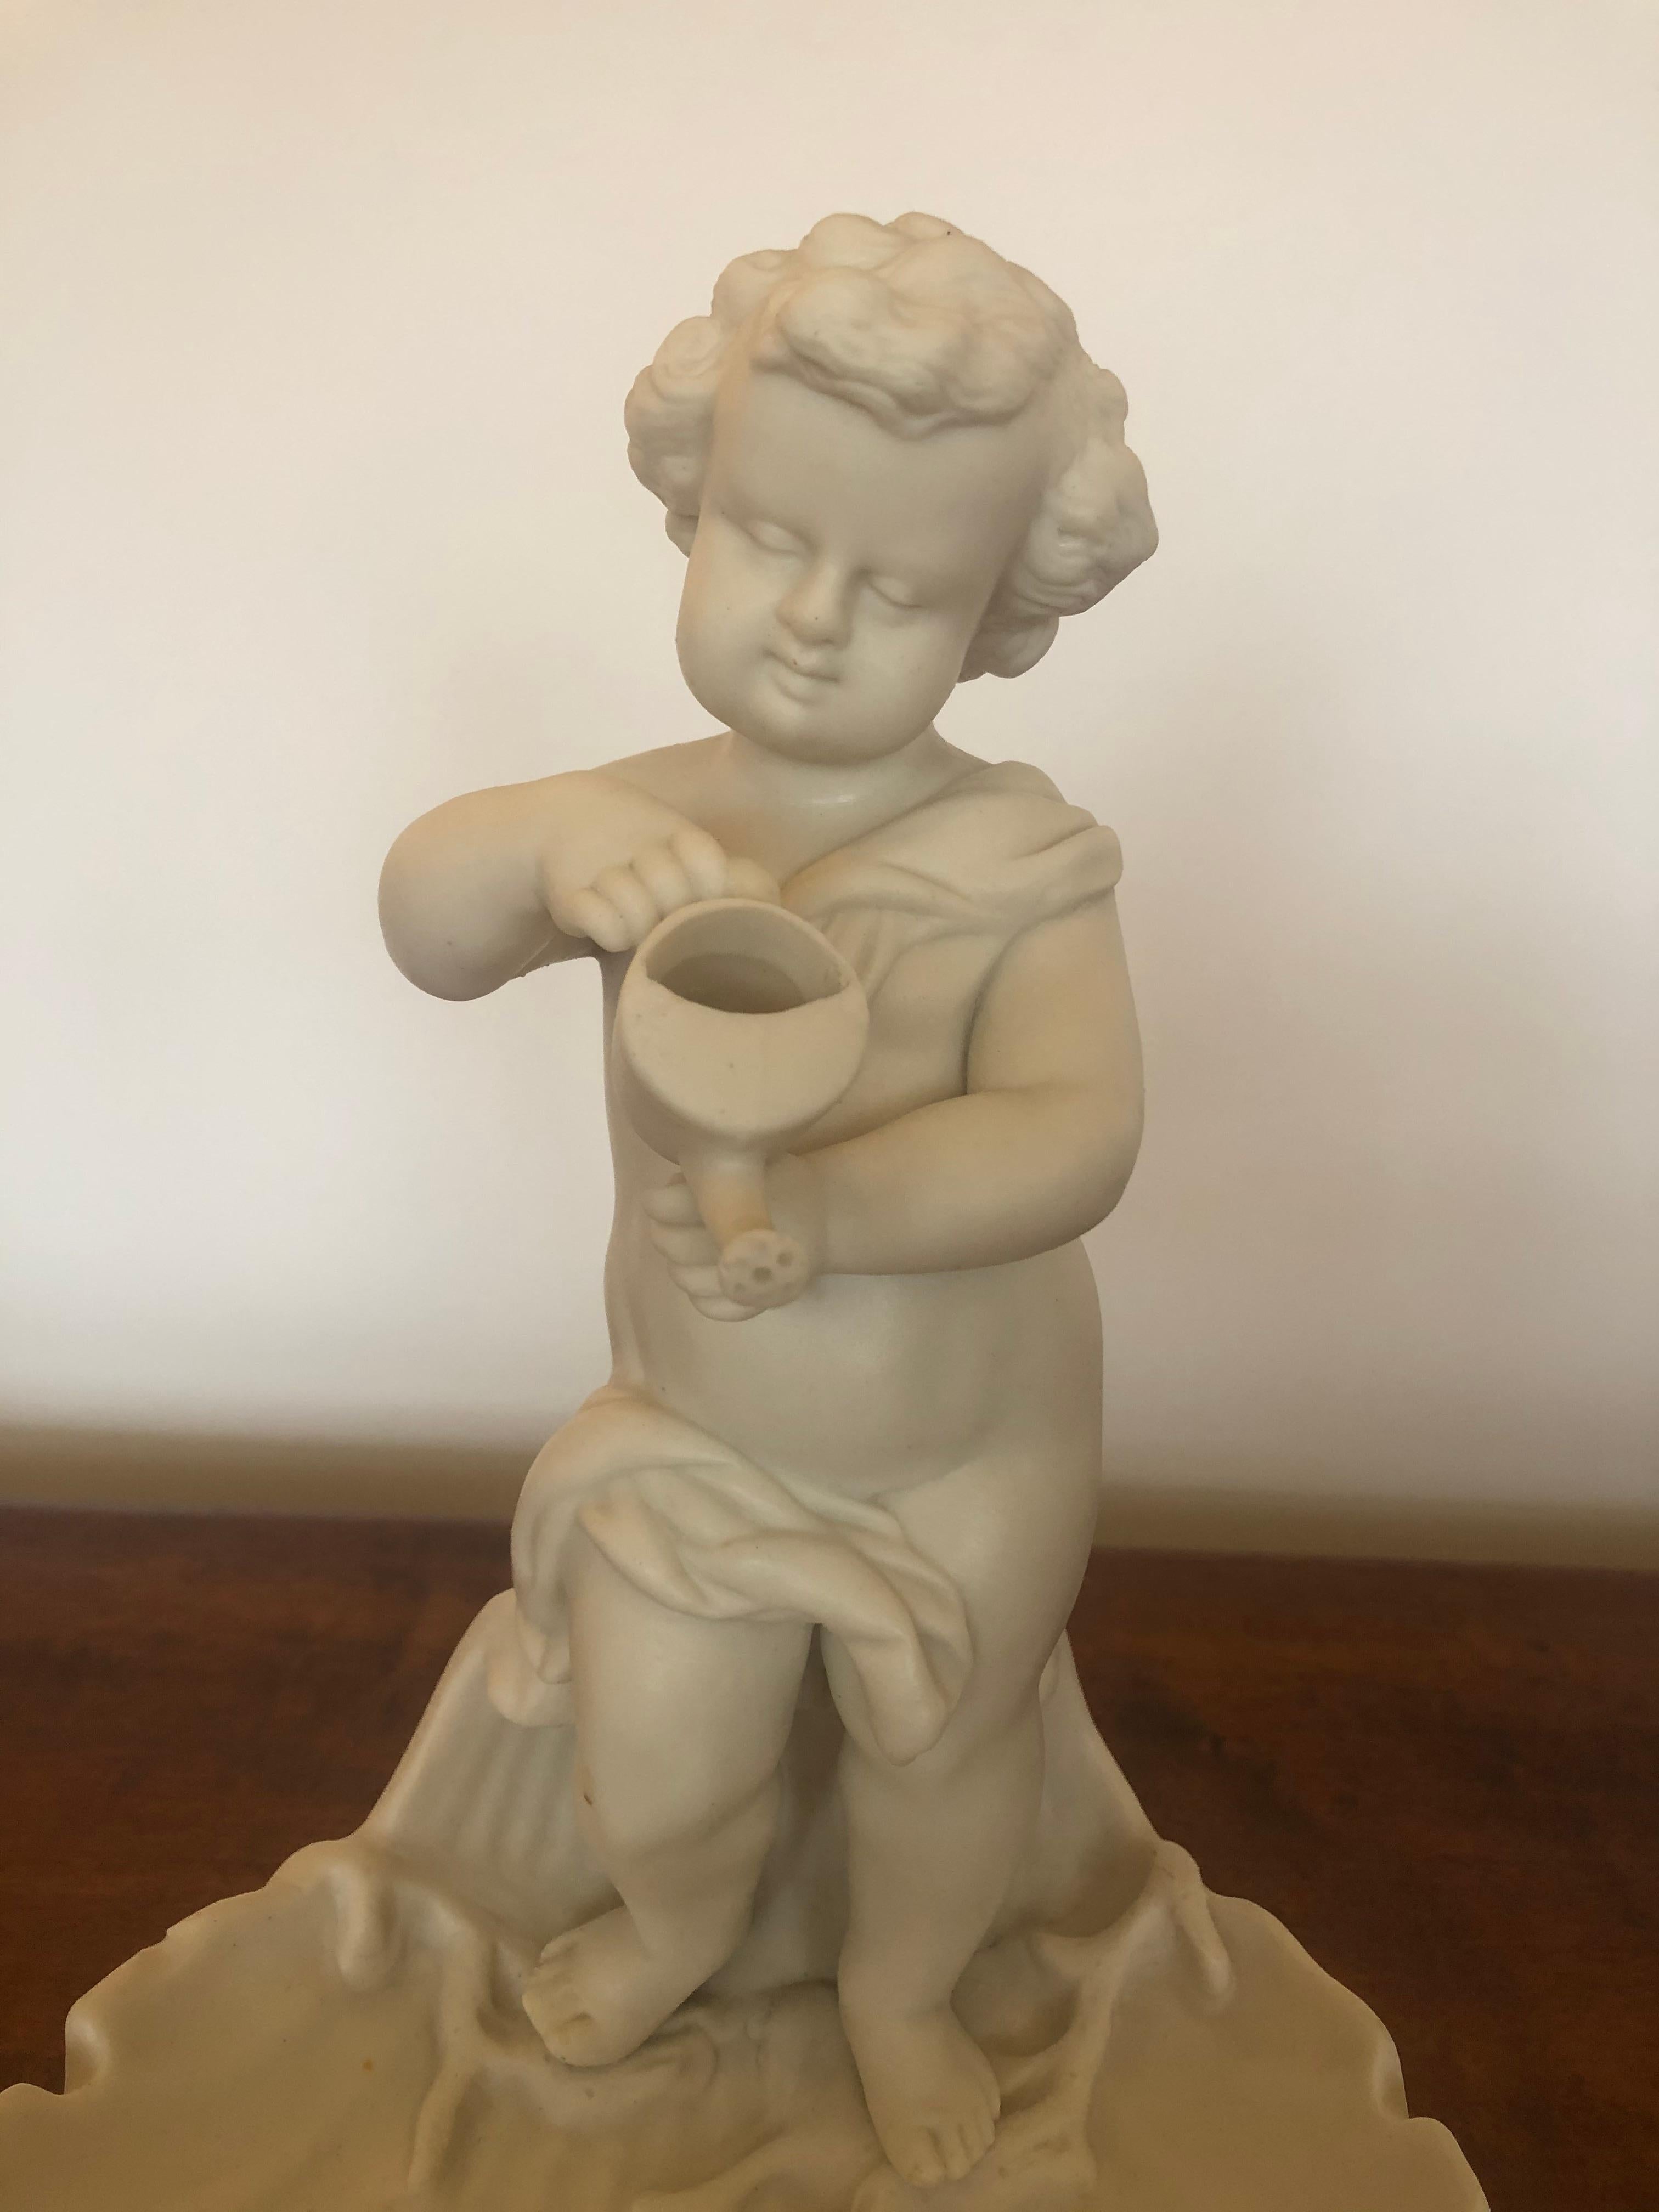 Magical vintage porcelain sculpture of an adorable putti with watering can, perched at the edge of a scalloped shell shaped dish.